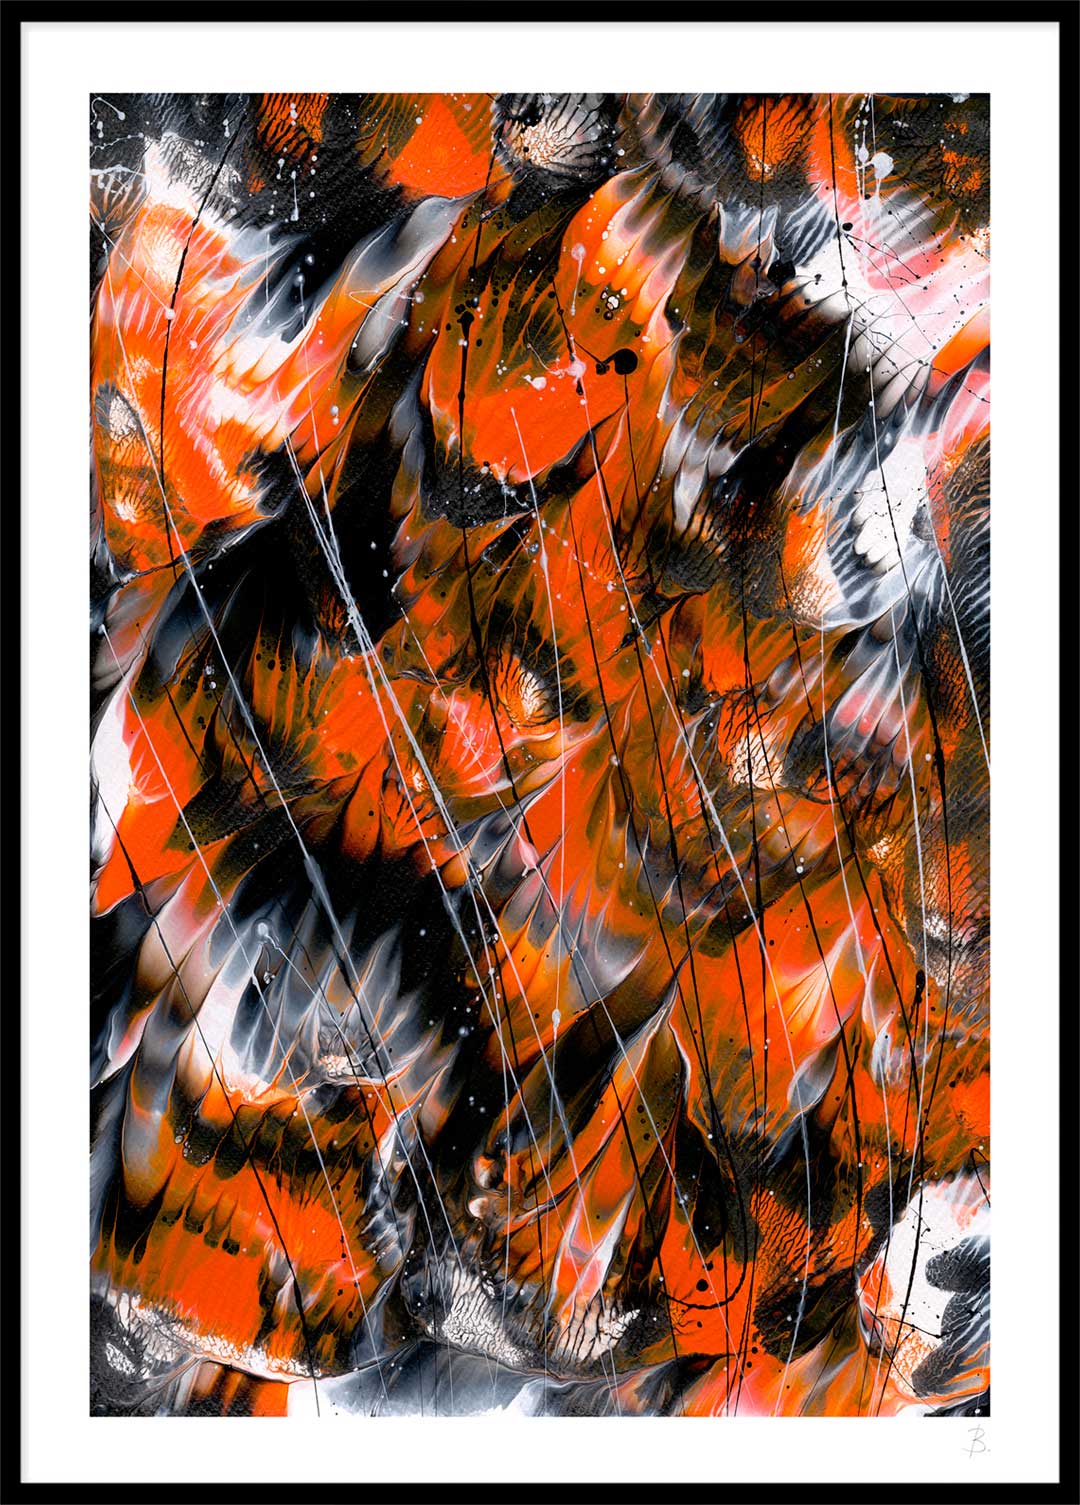 Monarch 1 Butterfly Series Paper Print seen in solid timber  Black Frame. After original painting on paper by Bridget Bradley. Learn More about these beautiful abstract prints